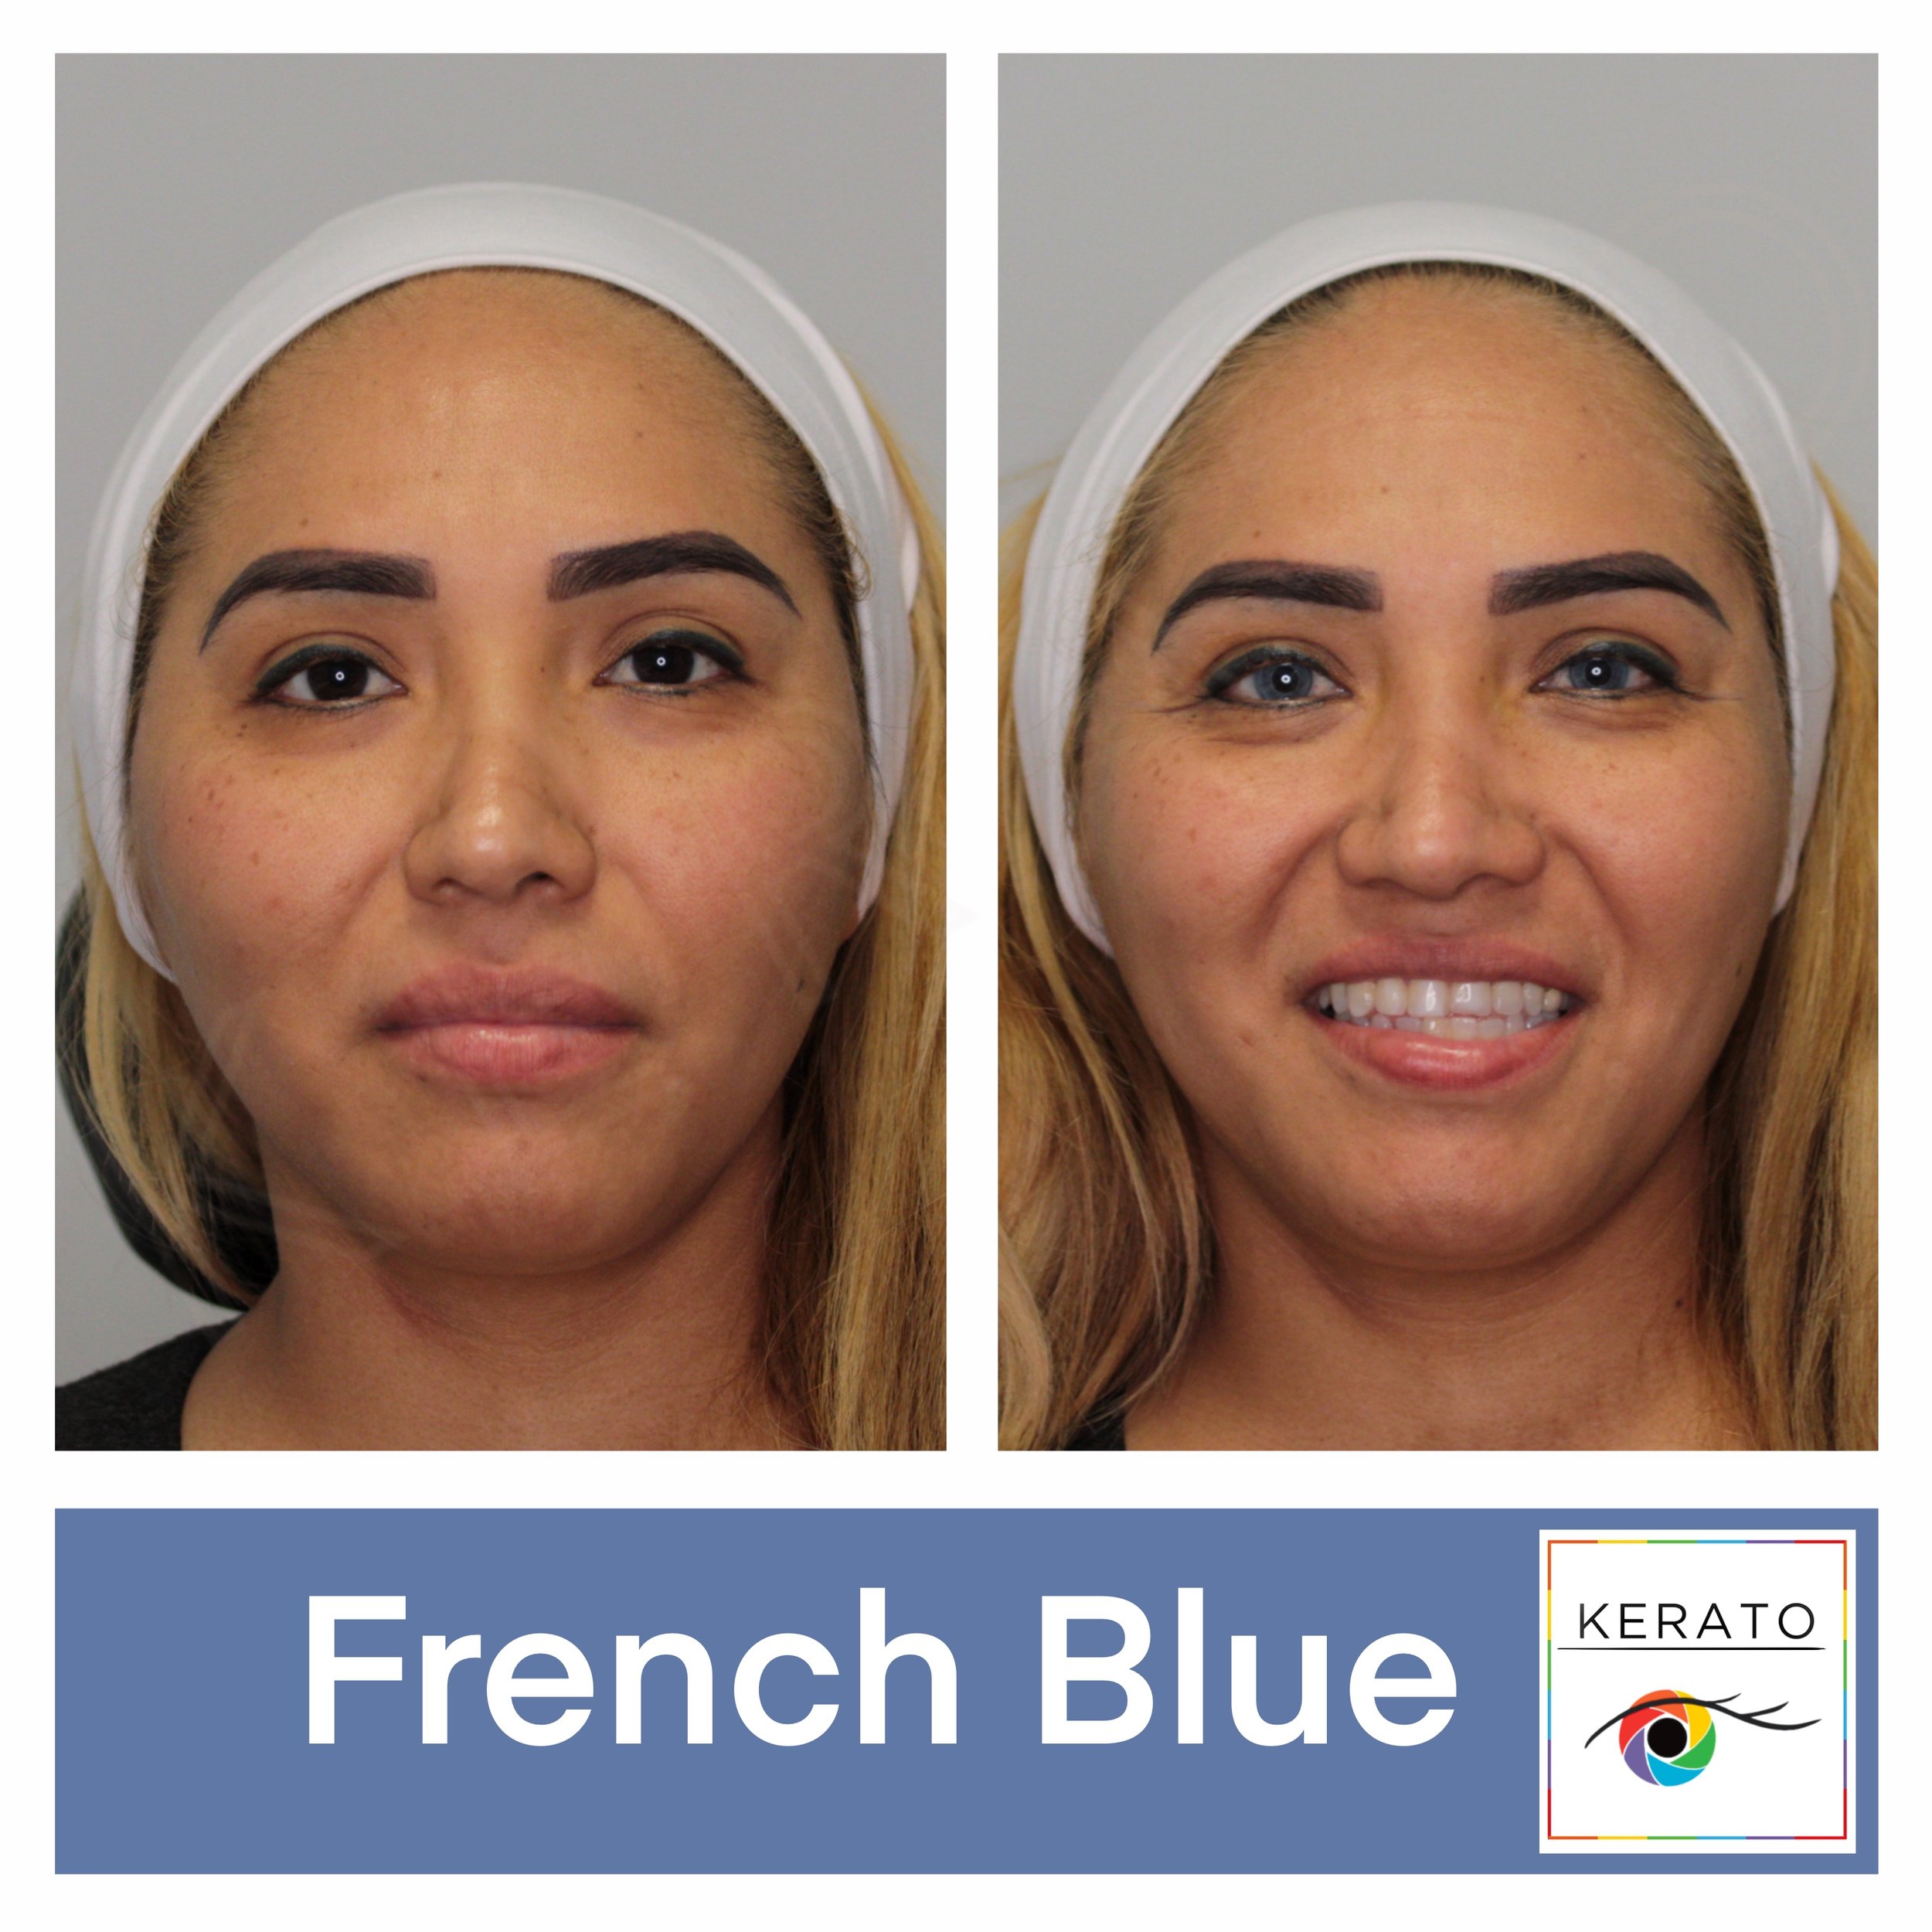 Eye Color Change with French Blue Pigment at KERATO